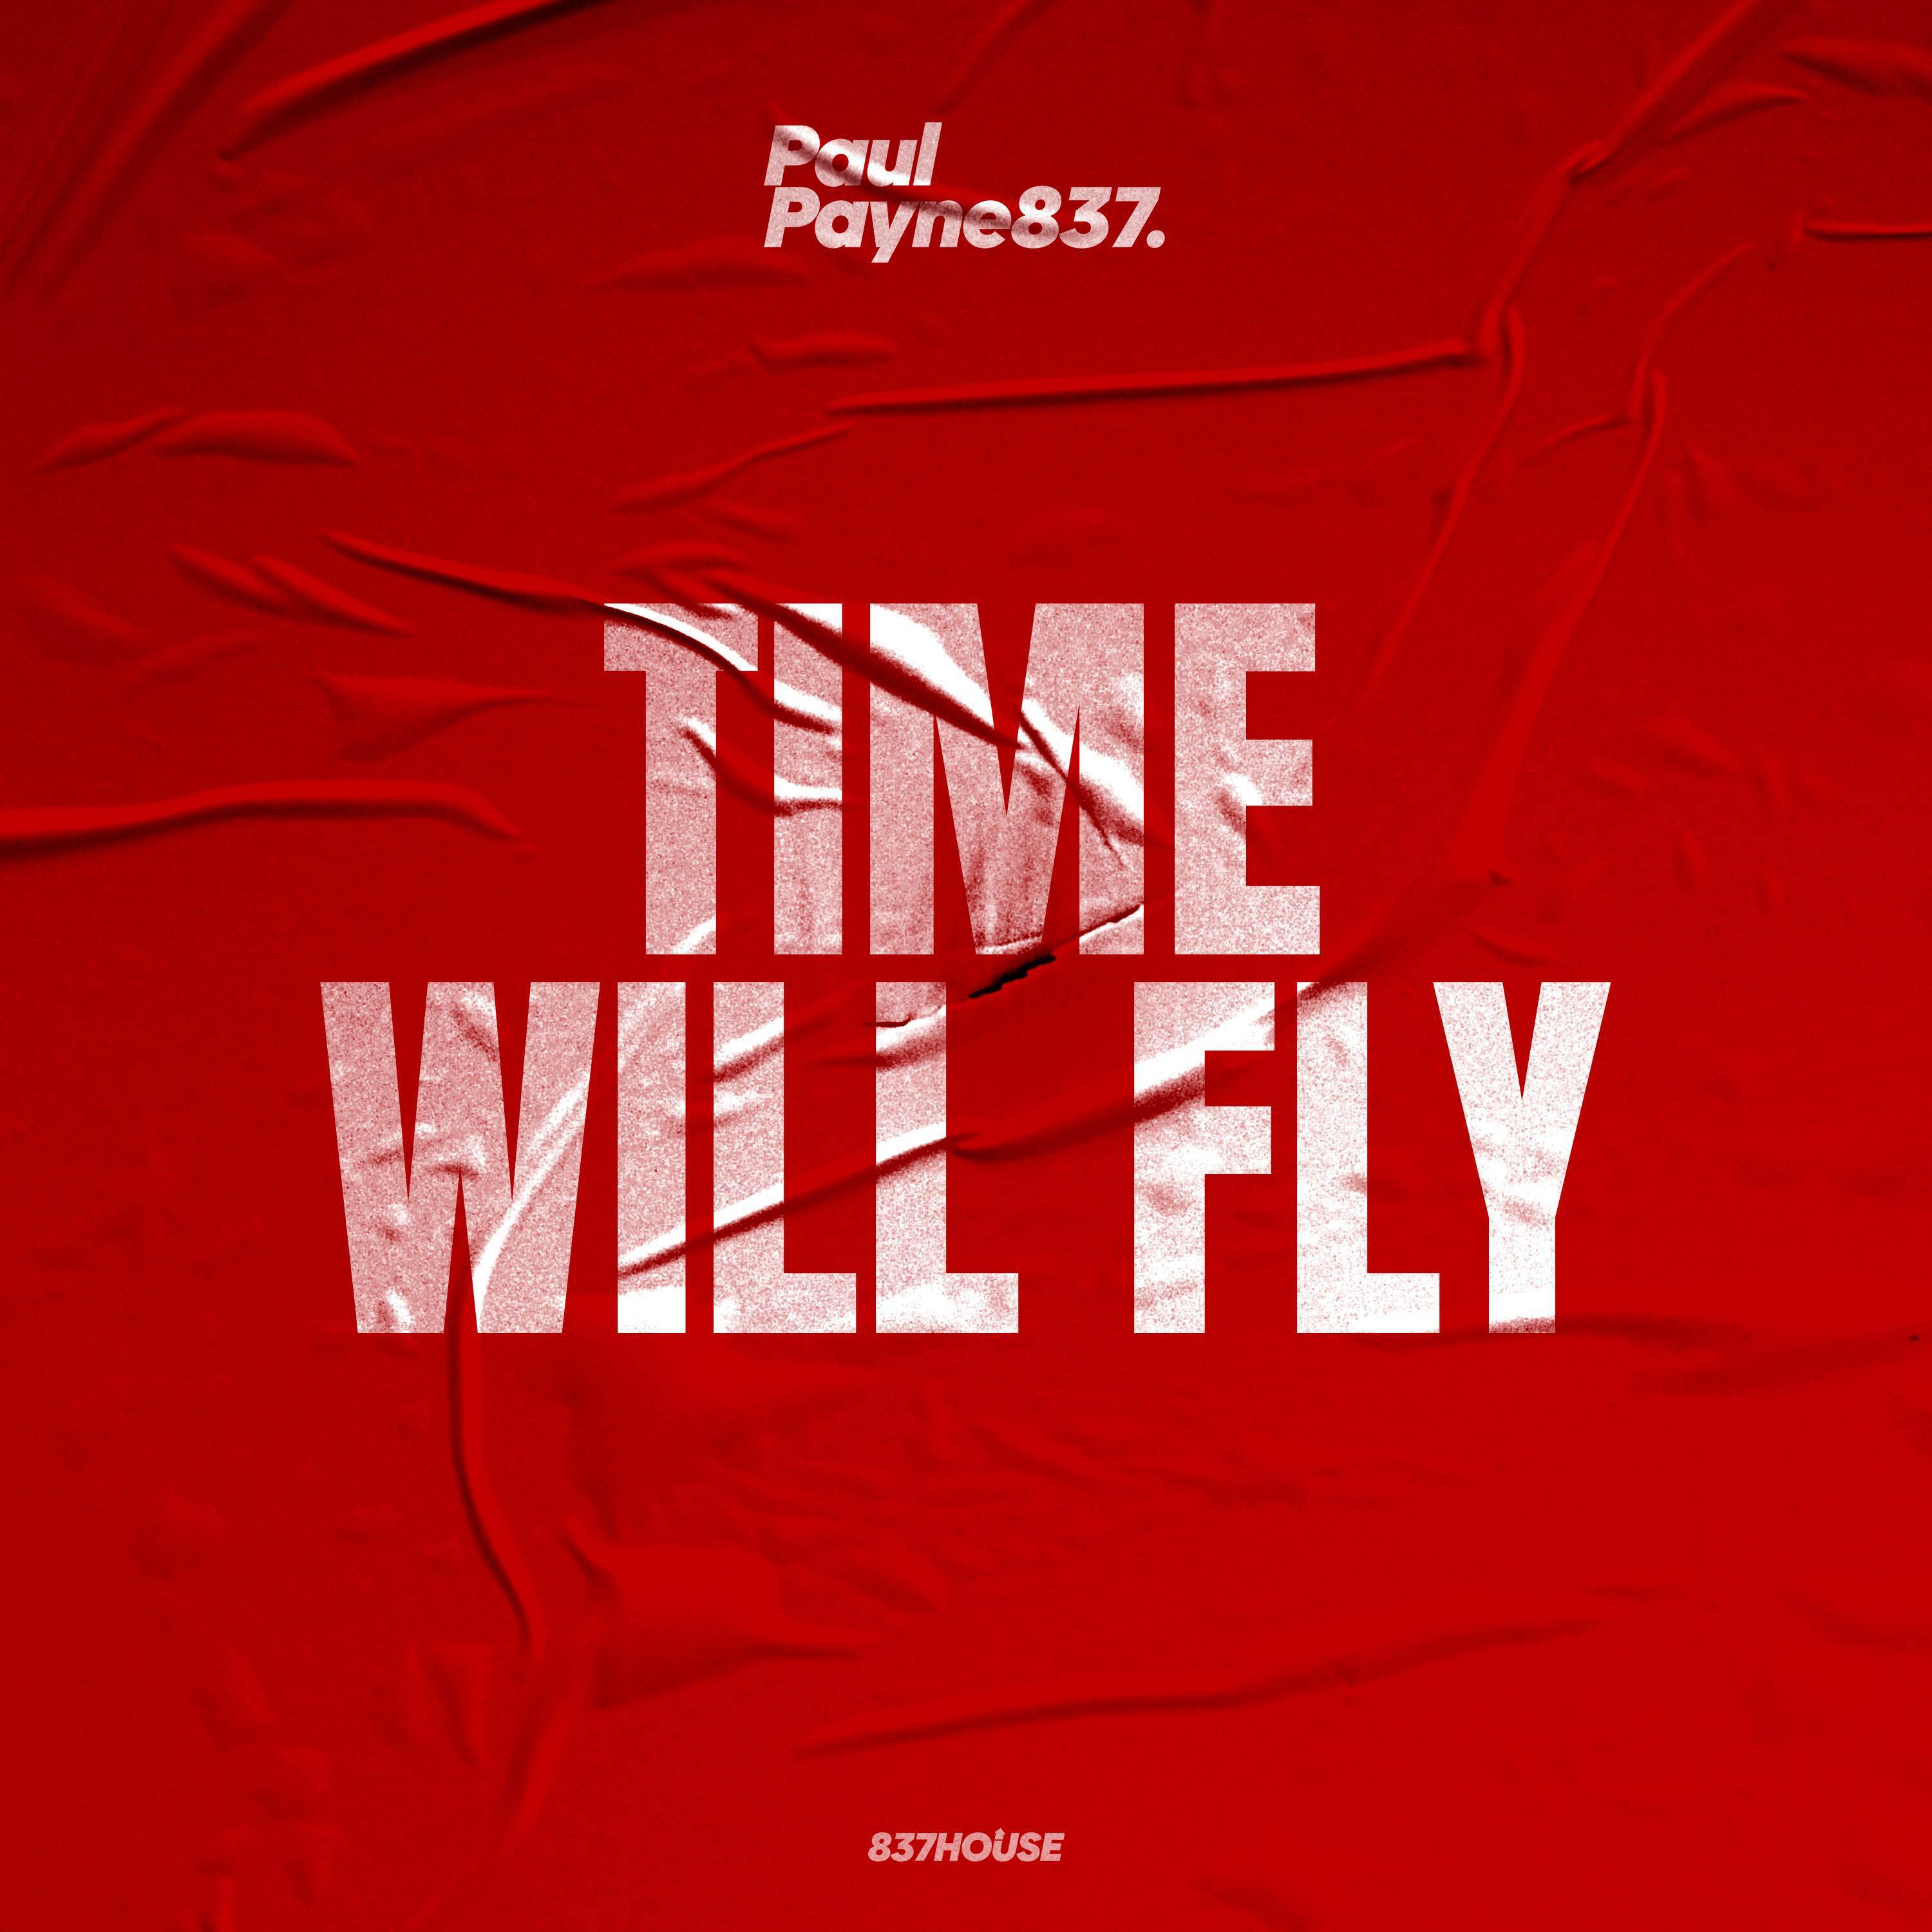 Paul Payne837 - Time Will Fly